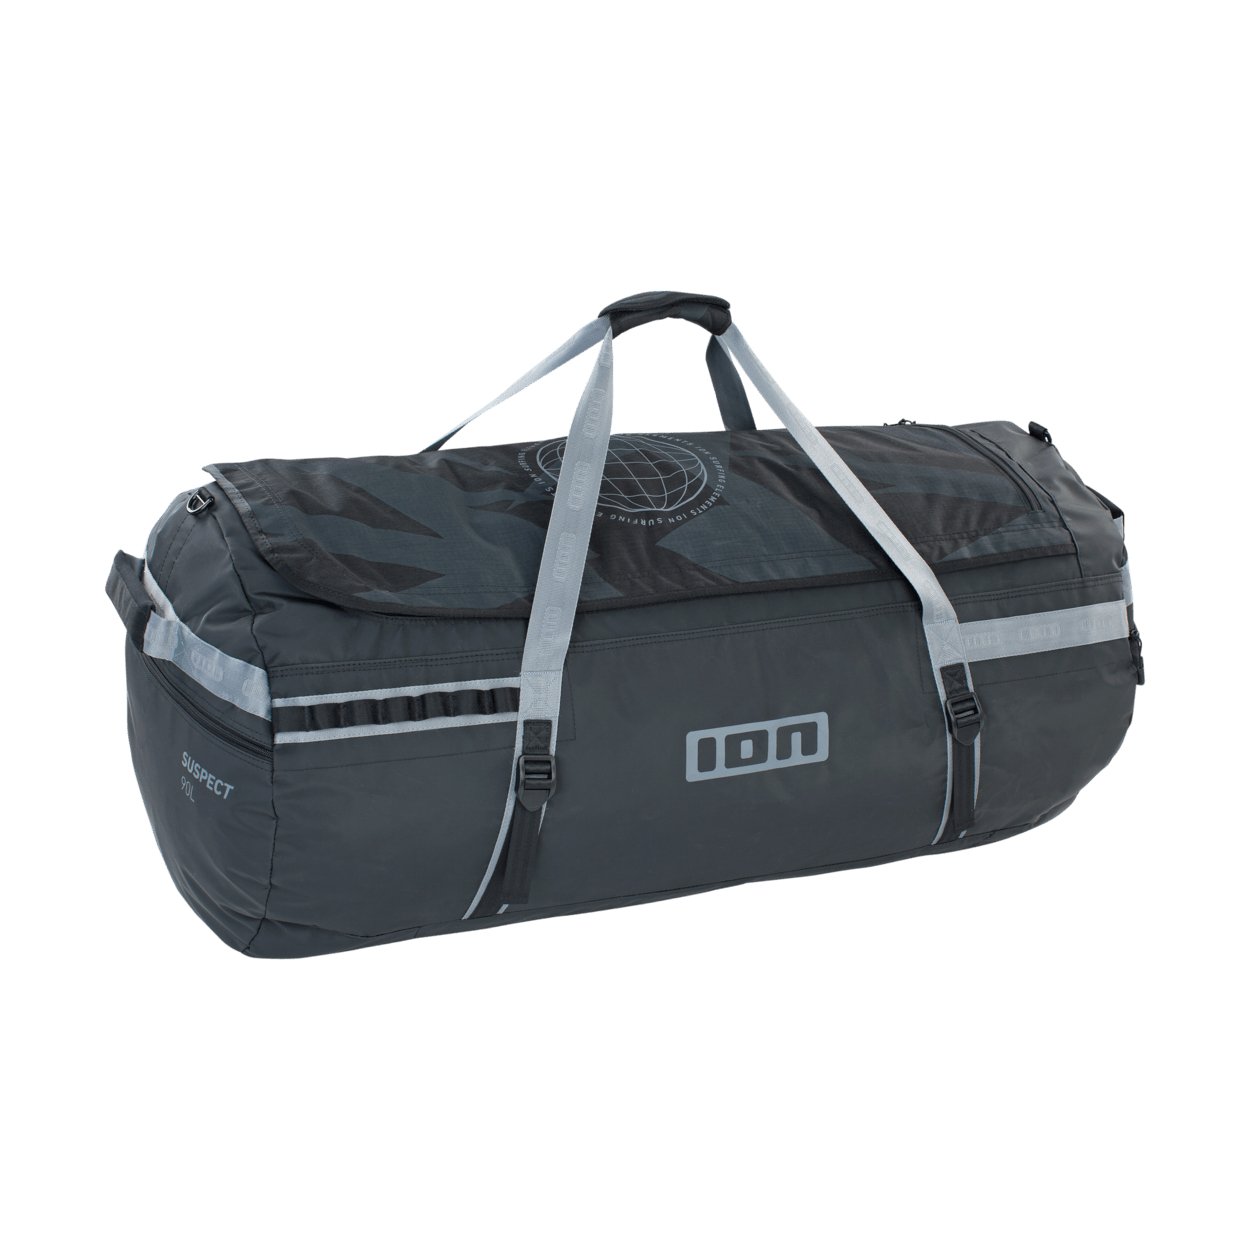 ION Suspect Duffel Bag 2022 - Worthing Watersports - 9010583059686 - Bags - ION Water